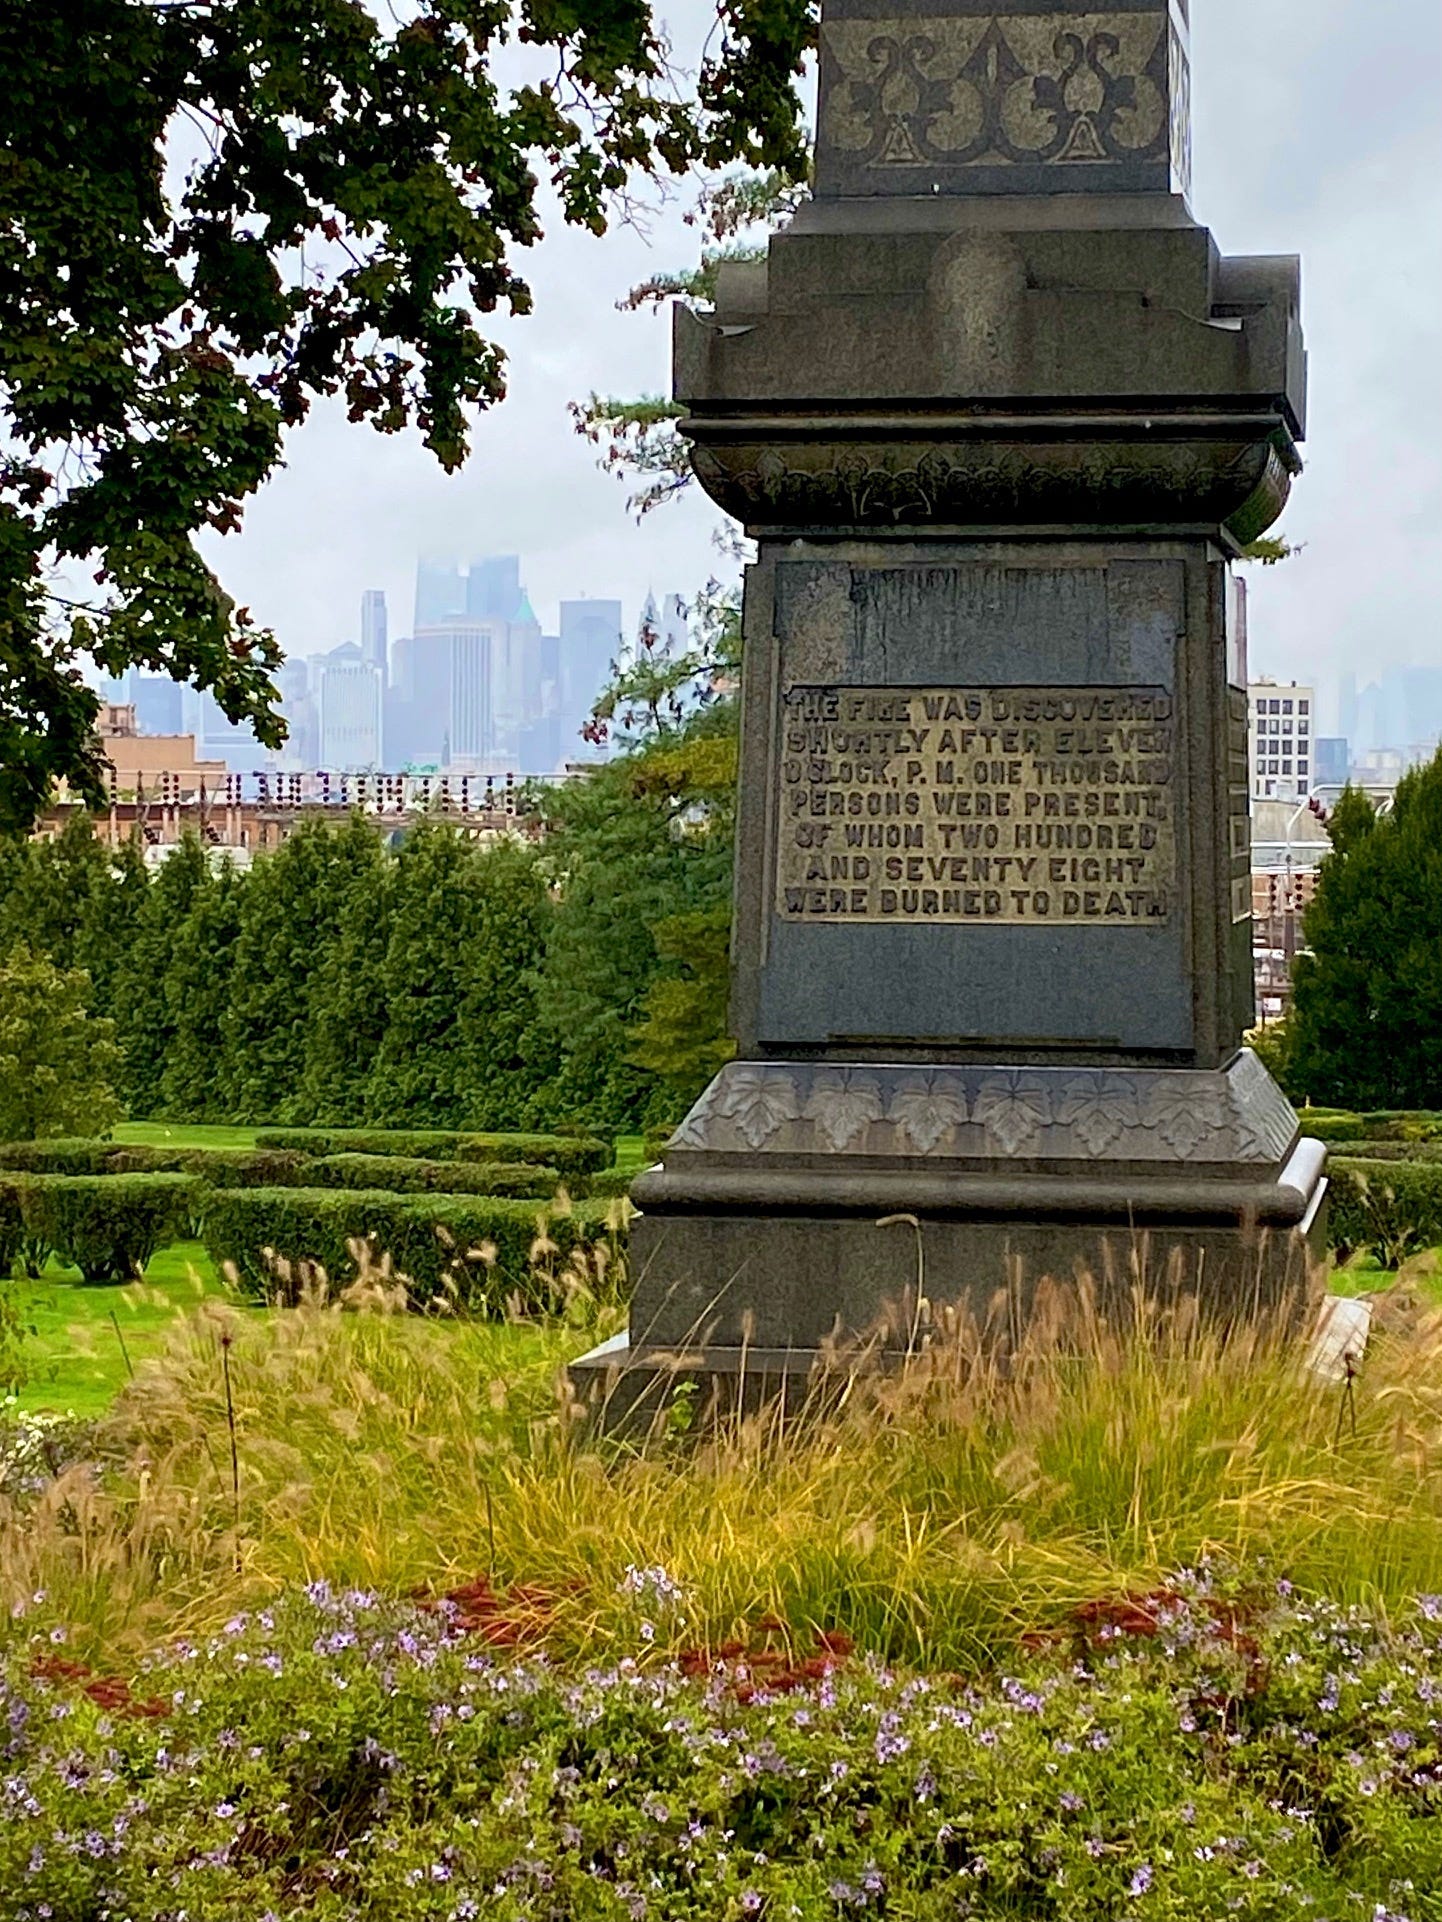 The memorial for the Brooklyn Theatre fire and the marker for its unknown victims. A bronze plaque on an obelisk set amongst grass and flowers reads, "The fire was discovered shortly after 11 o'clock, P.M. One thousand persons were present of whom two hundred and seventy eight were burned to death." The skyline can be seen in far background.